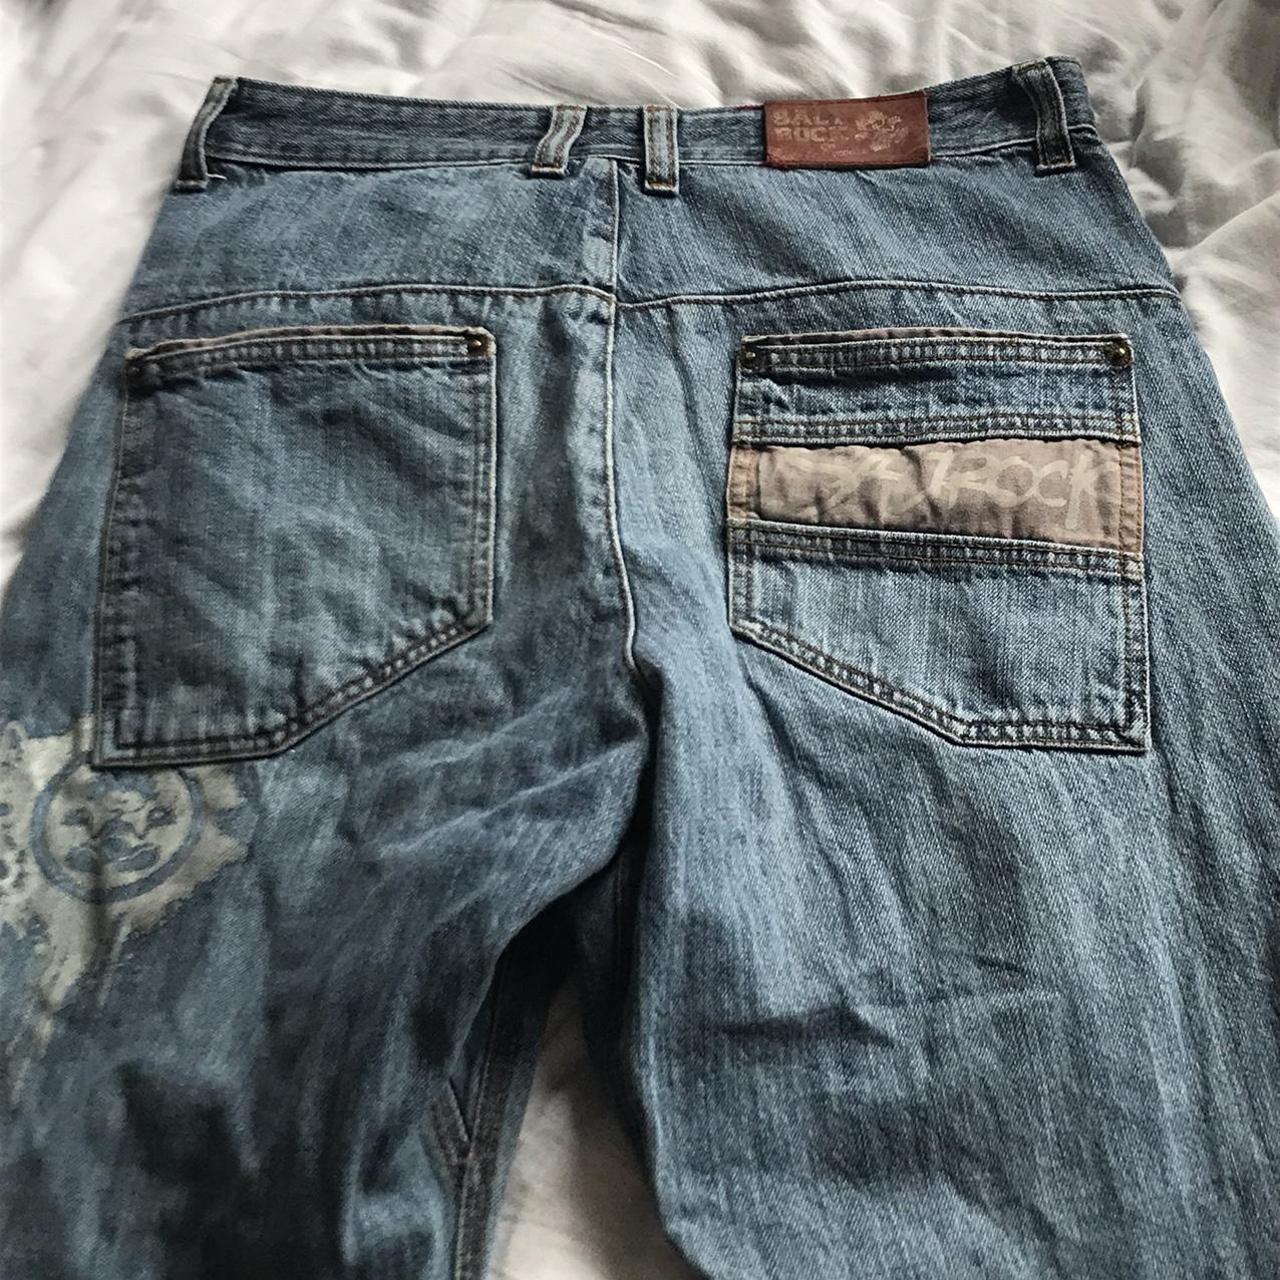 Saltrock skater jeans -Used to wear them all the... - Depop